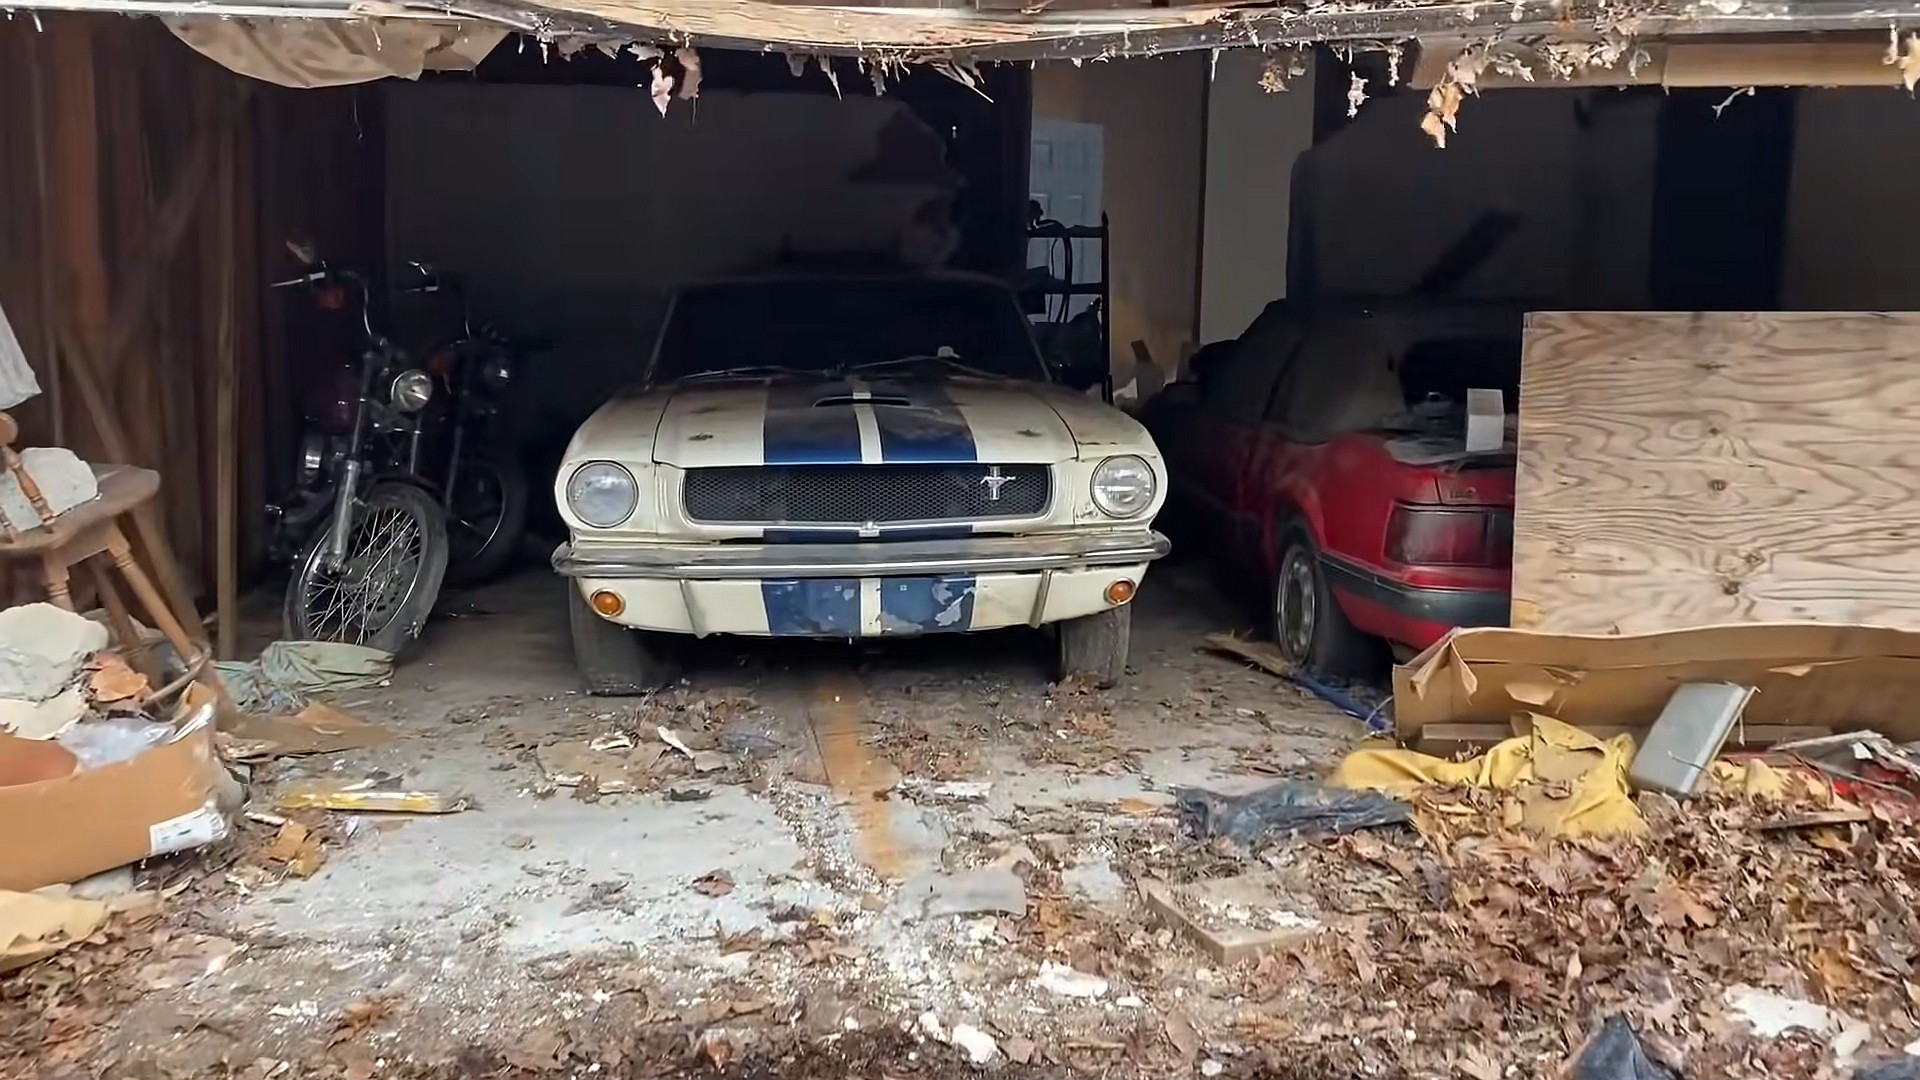 barn find gold 1965 shelby mustang gt350 stored for decades in abandoned house 8